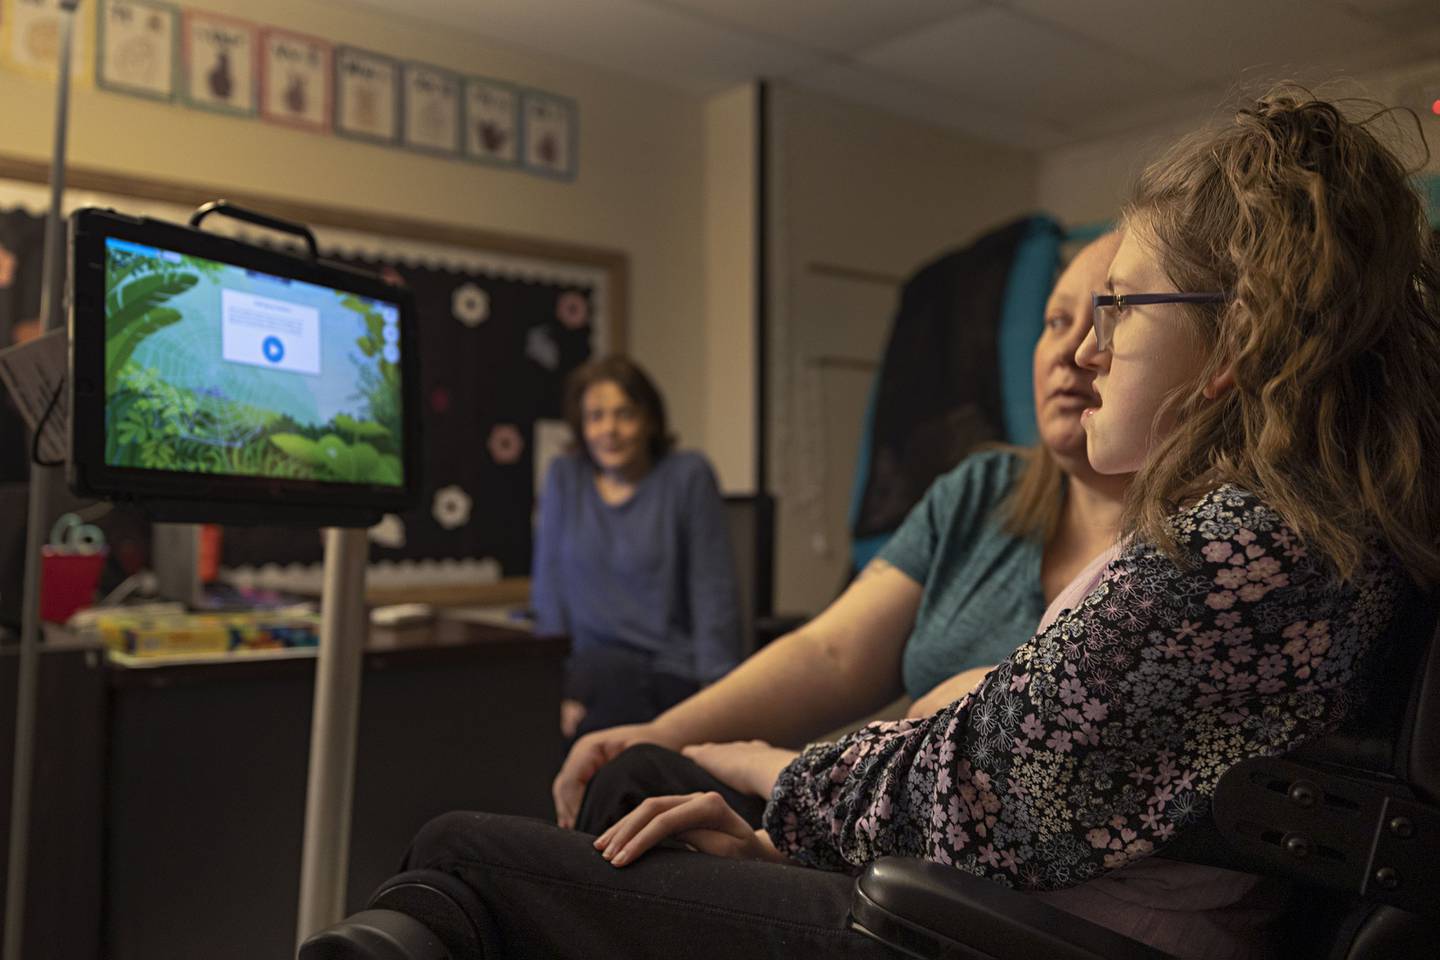 The eye gaze technology allows student Addy Weidman to move items and characters around a screen for learning purposes.